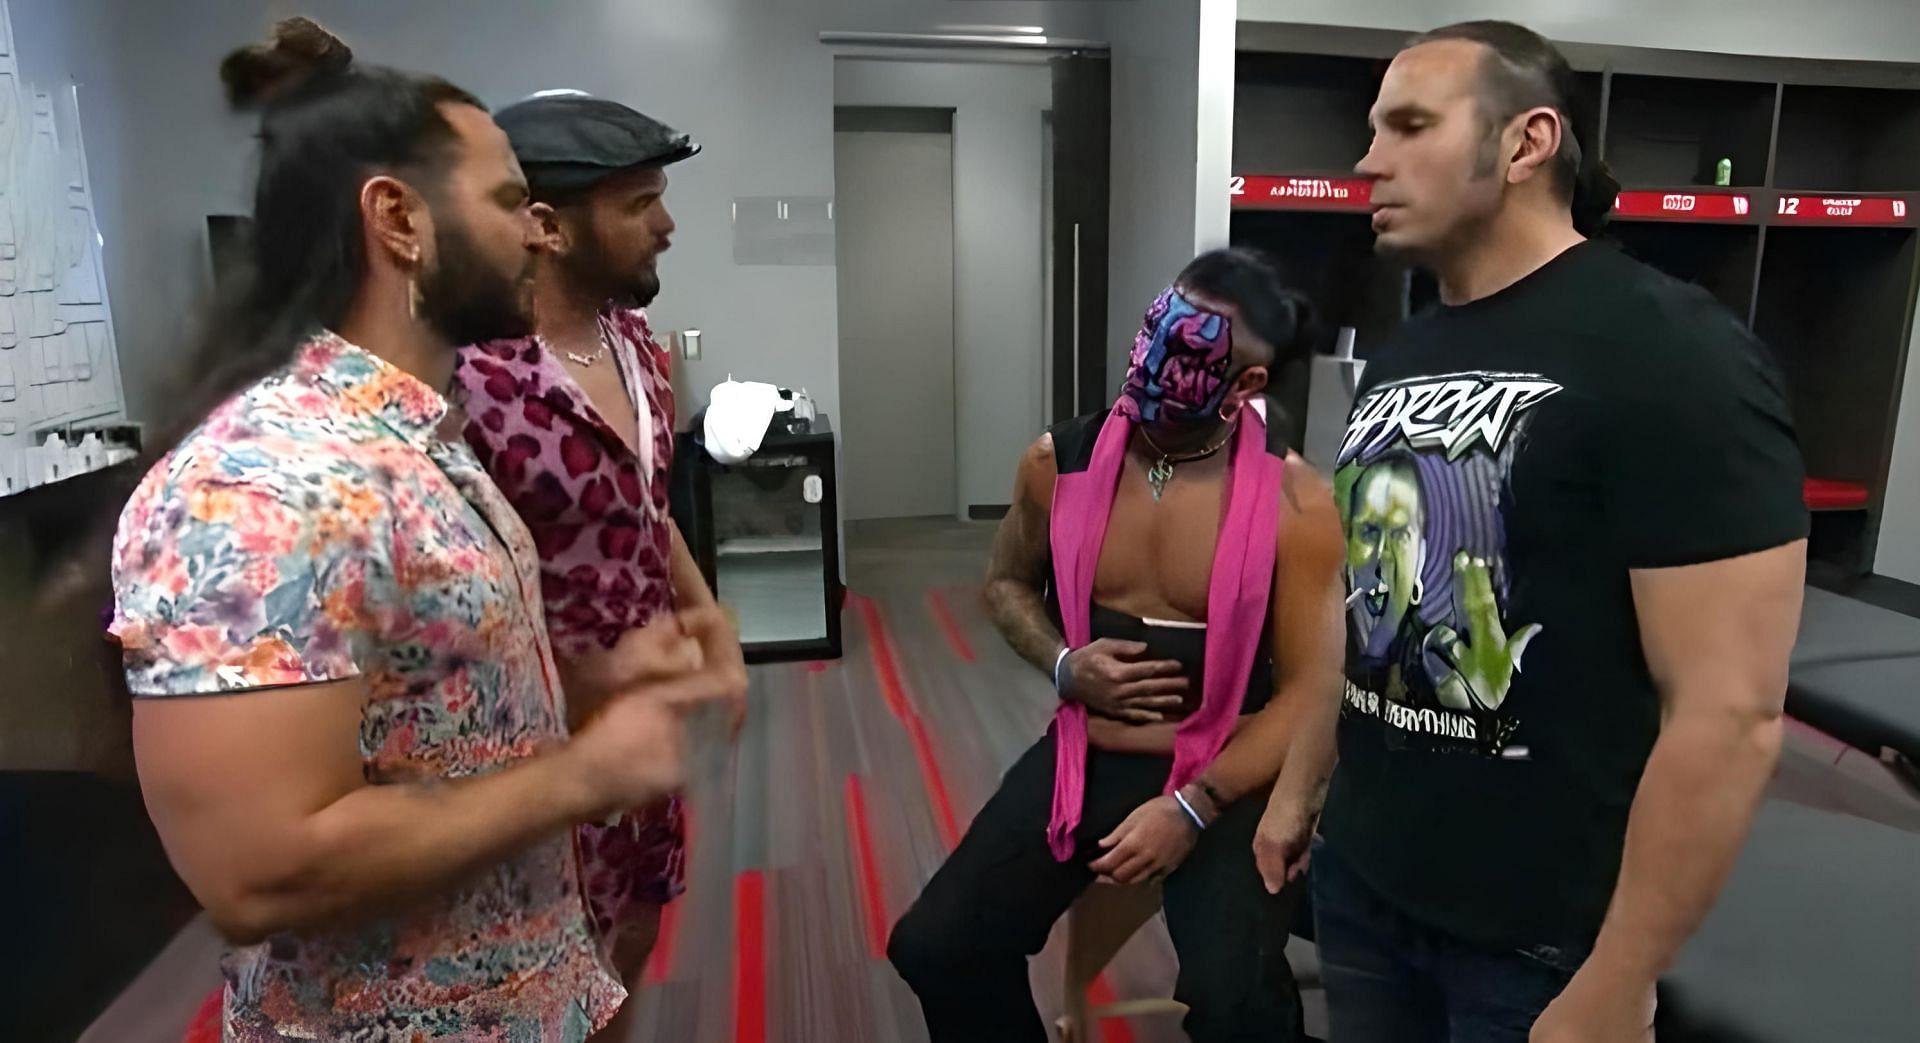 The Hardys and The Young Bucks are set to collide in a dream match